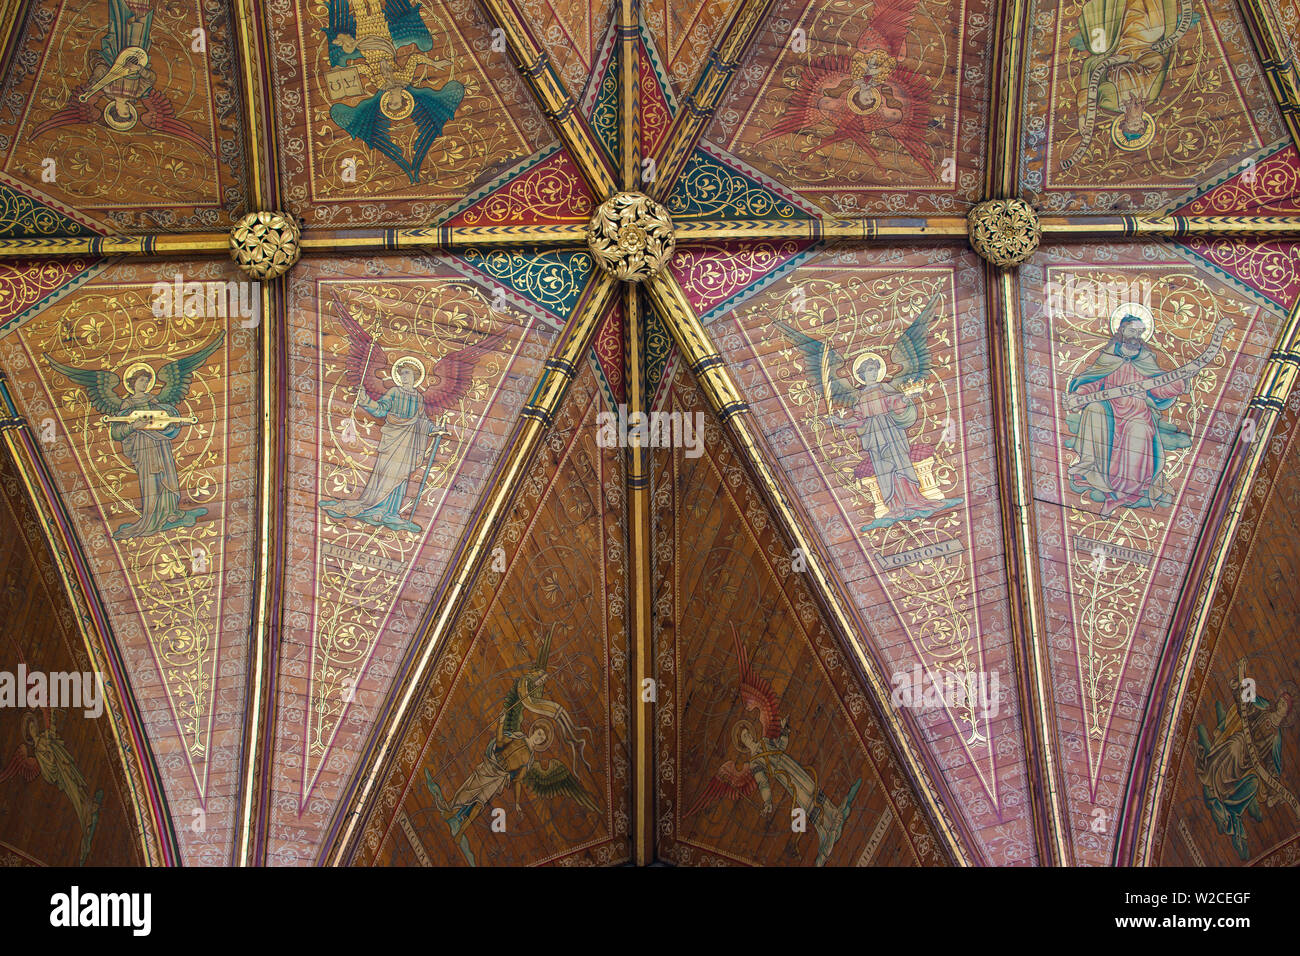 United Kingdom, England, Cheshire, Chester, Chester Cathedral ceiling Stock Photo